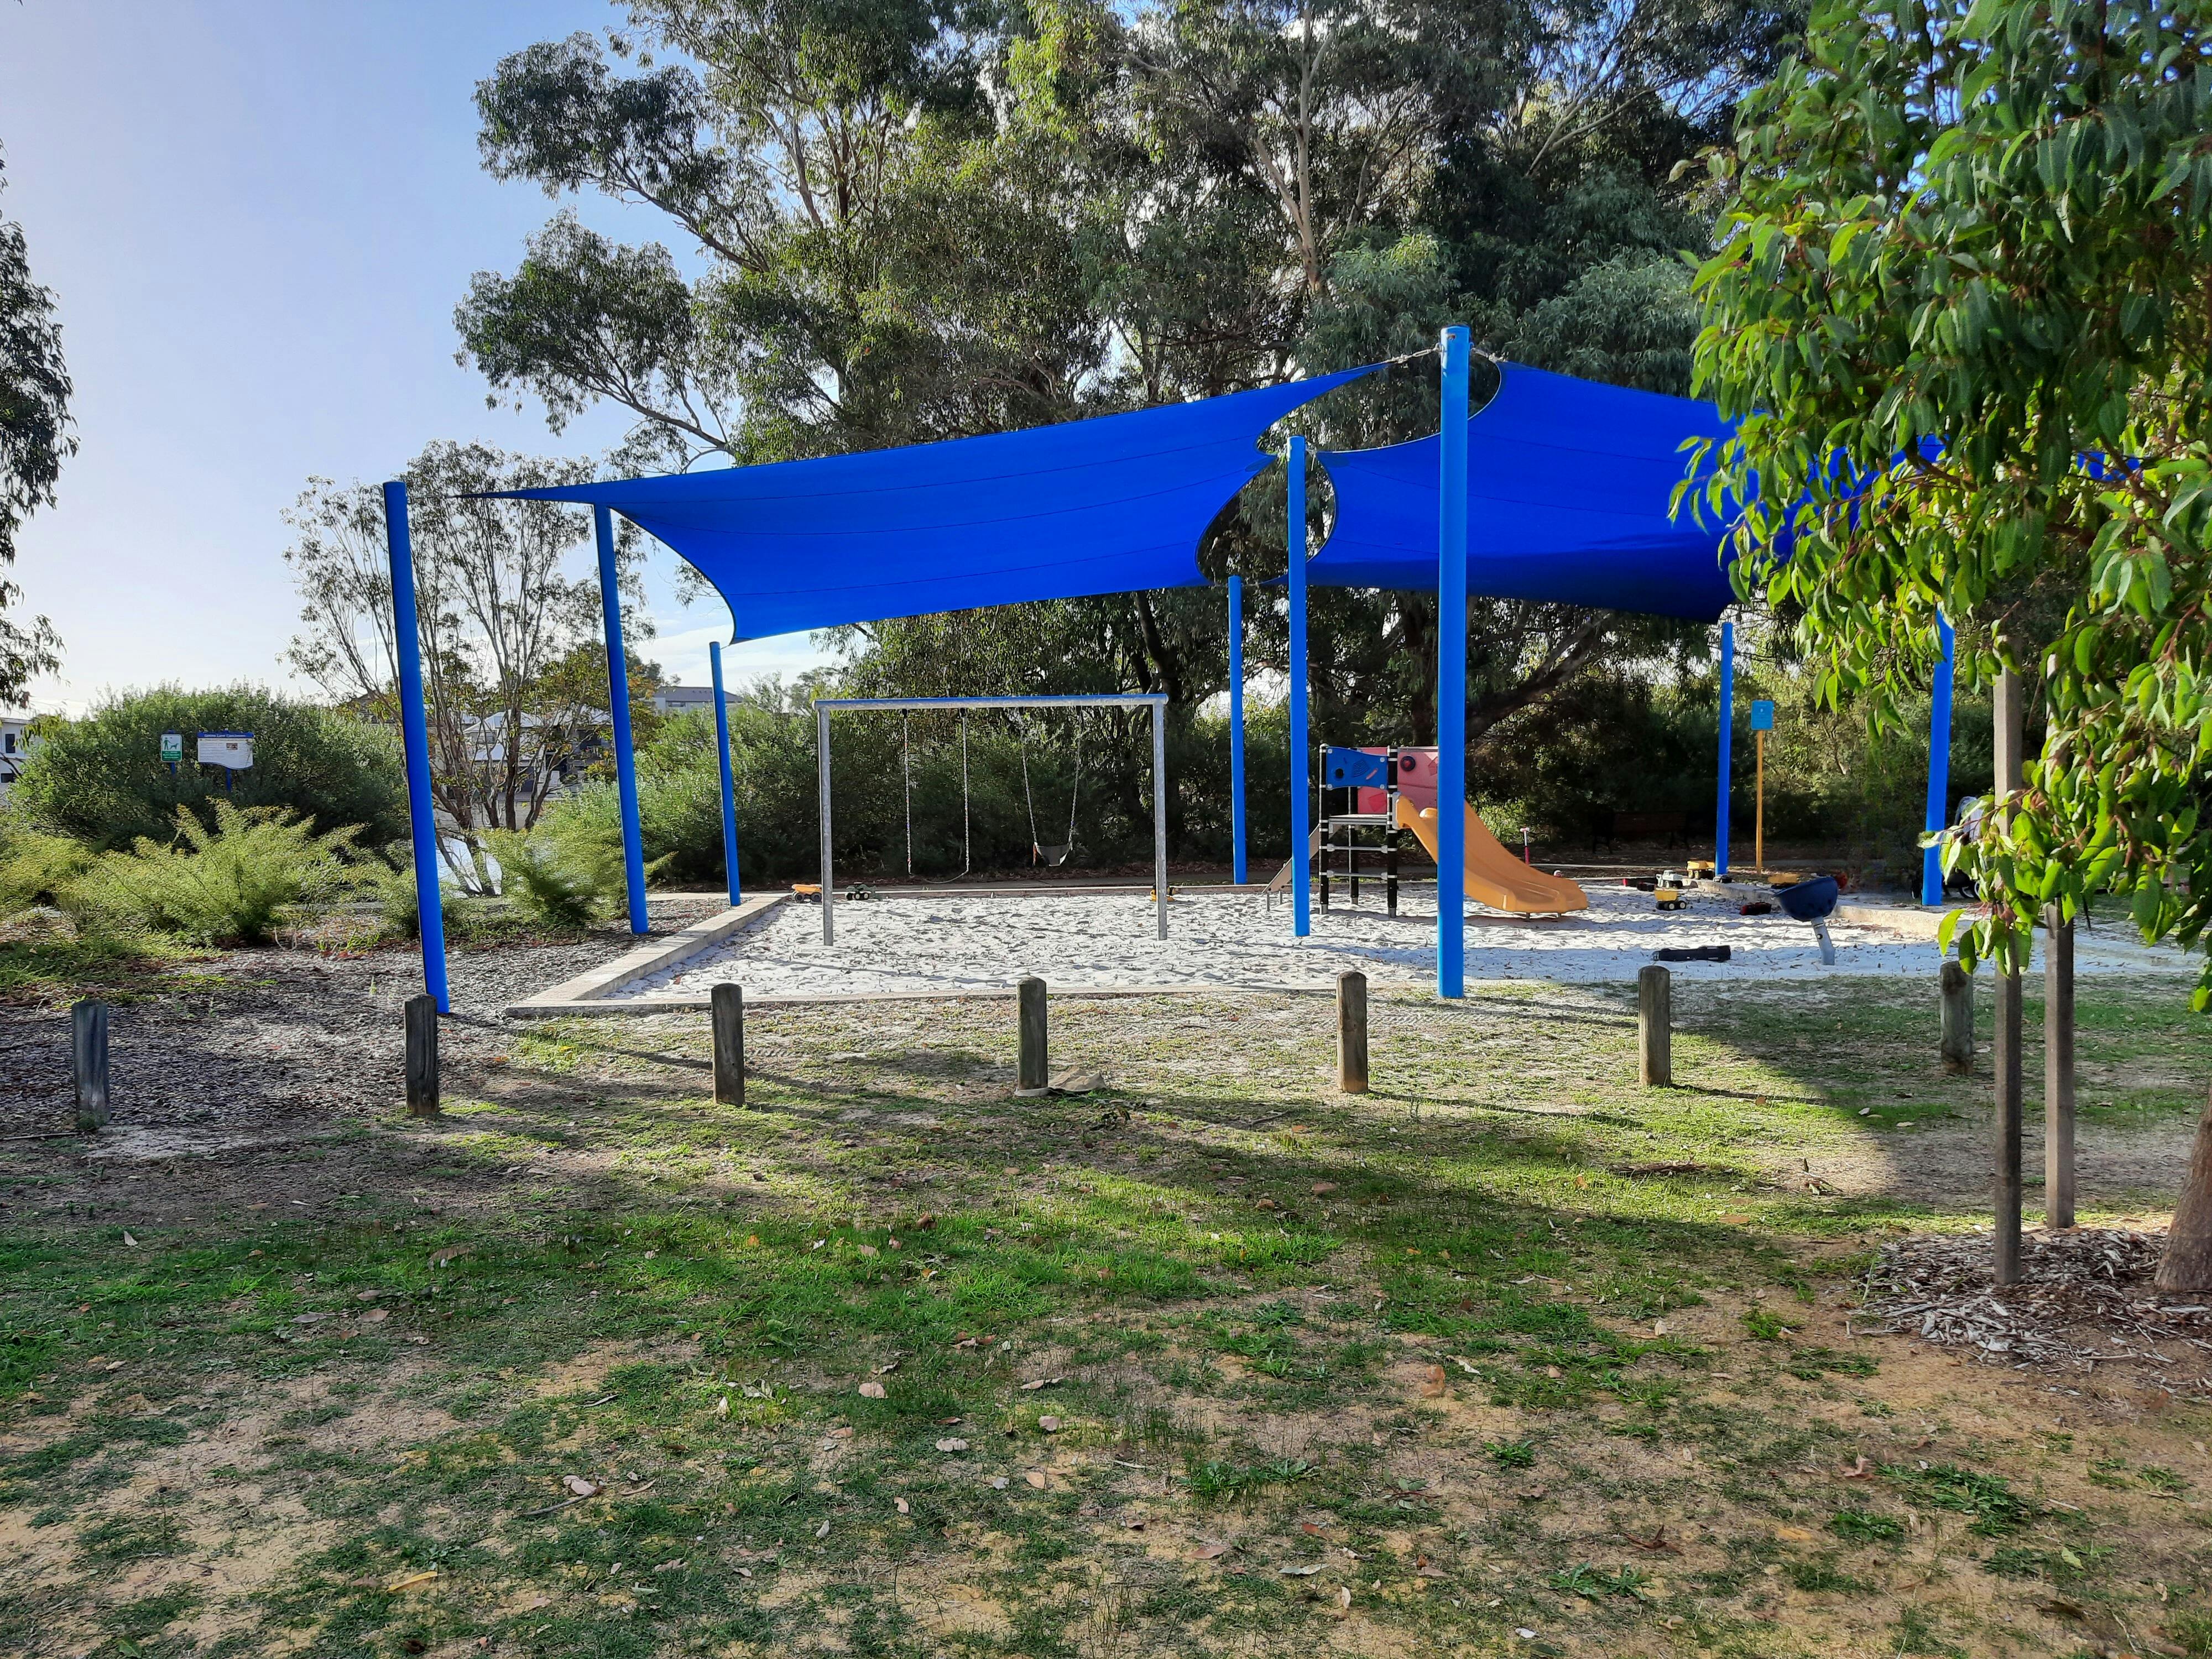 Existing play space